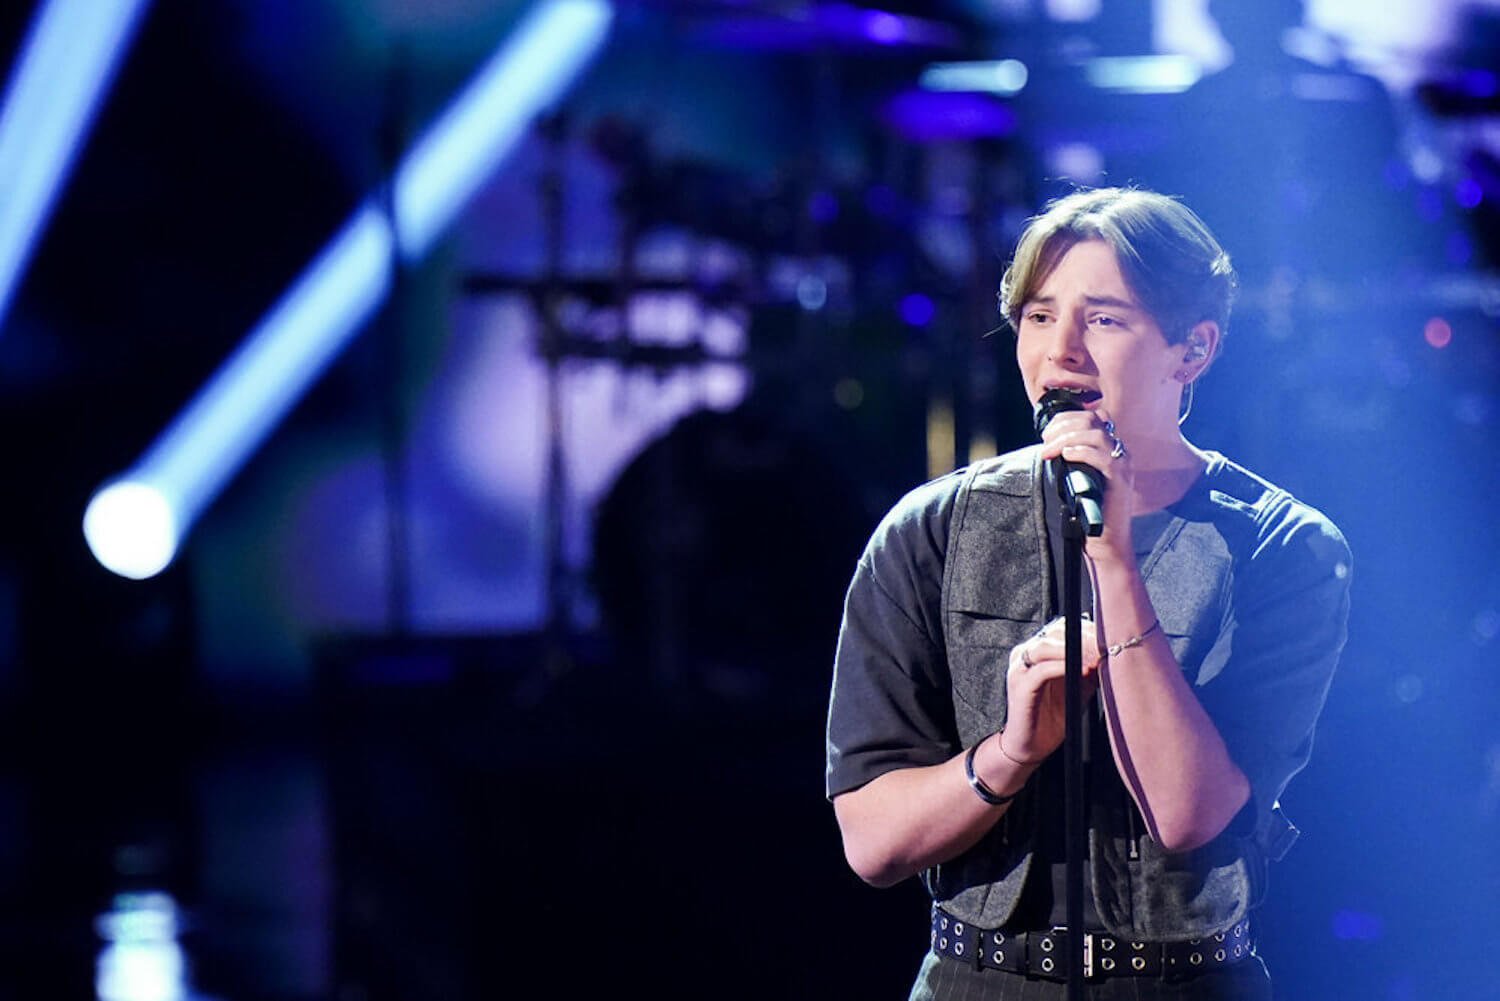 Ryley Tate Wilson on 'The Voice' Season 23 singing to get into the top 5